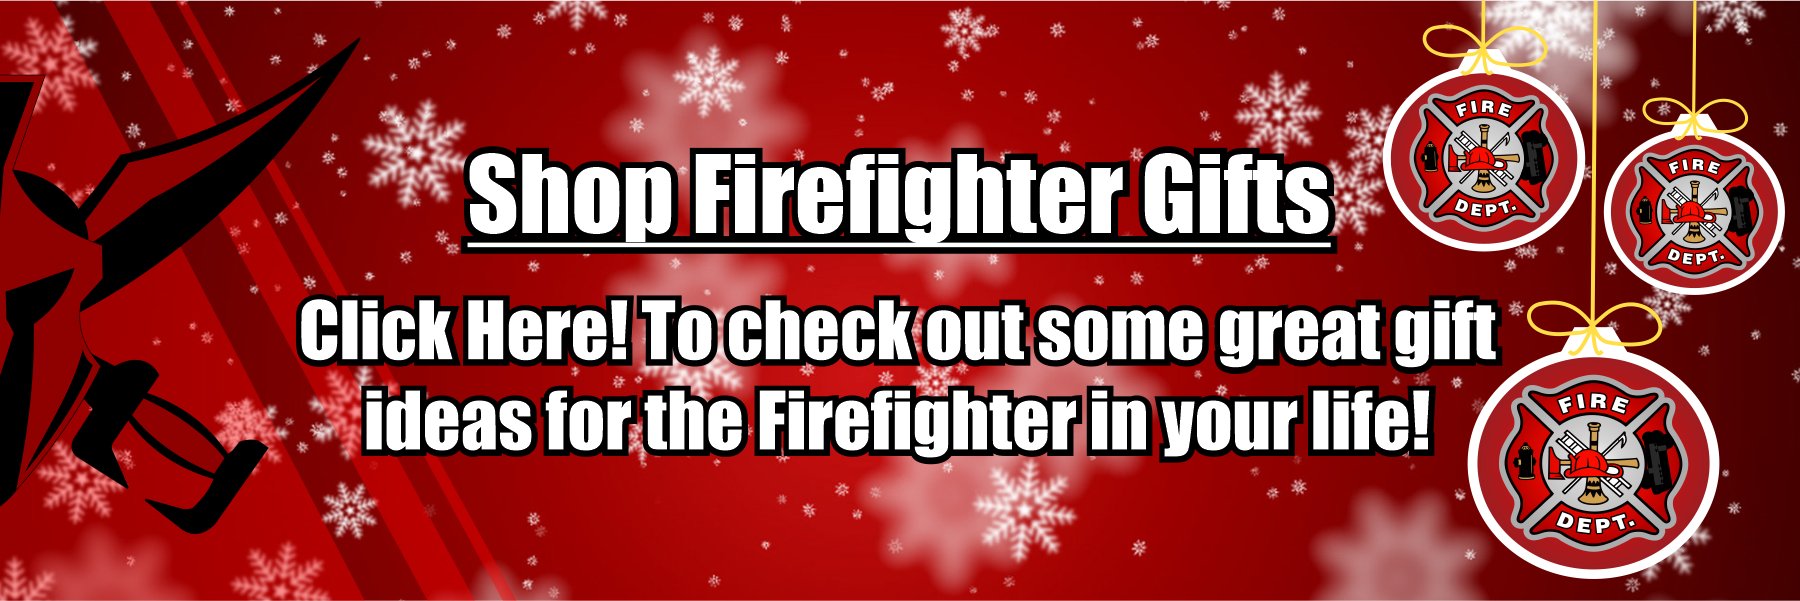 All Firefighter Gifts - Tactical Gear Junkie